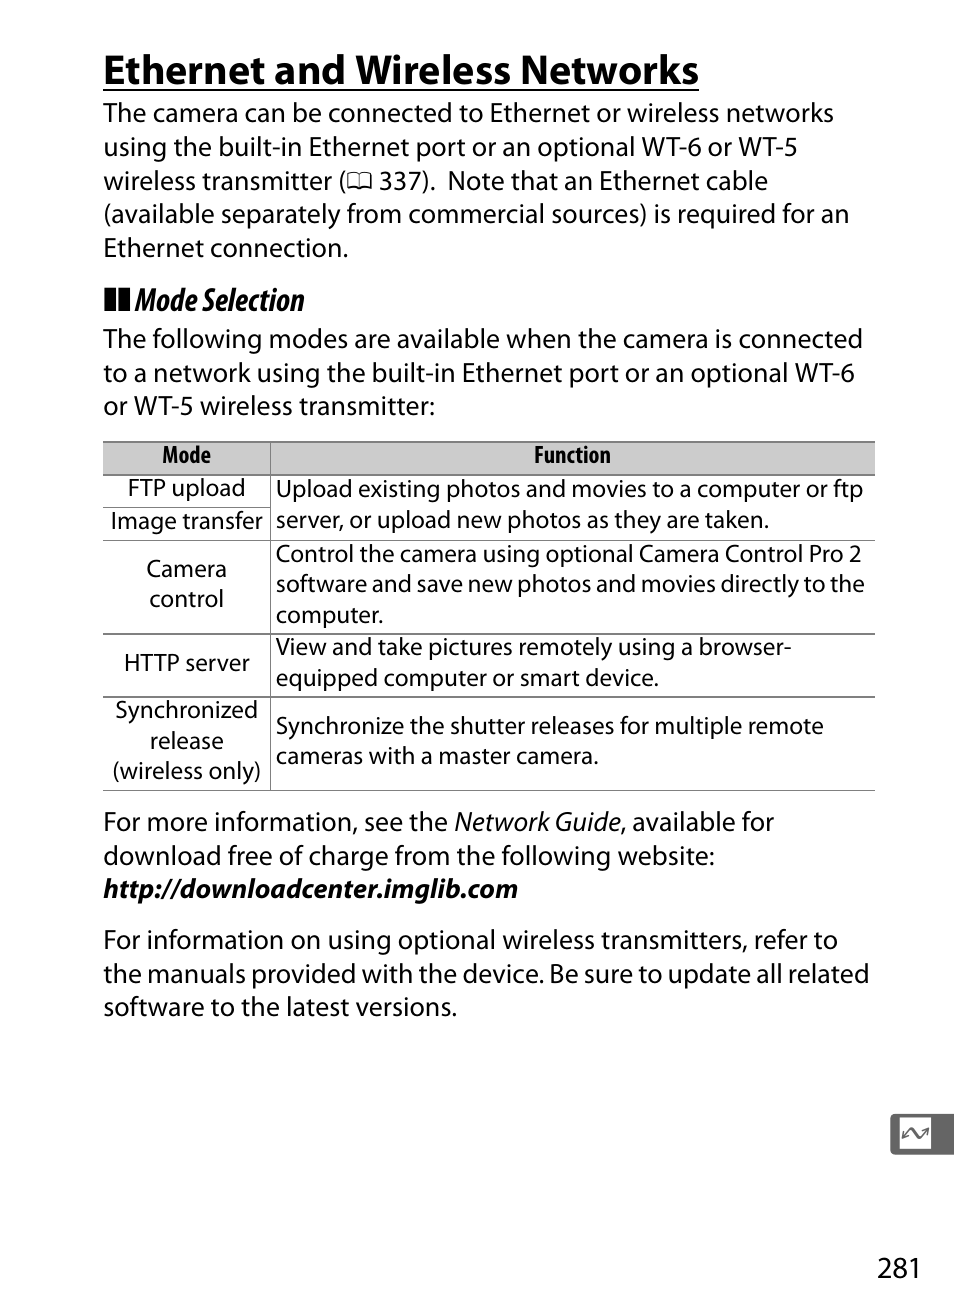 Ethernet and wireless networks, Mode selection | Nikon D5 User Manual | Page 303 / 424